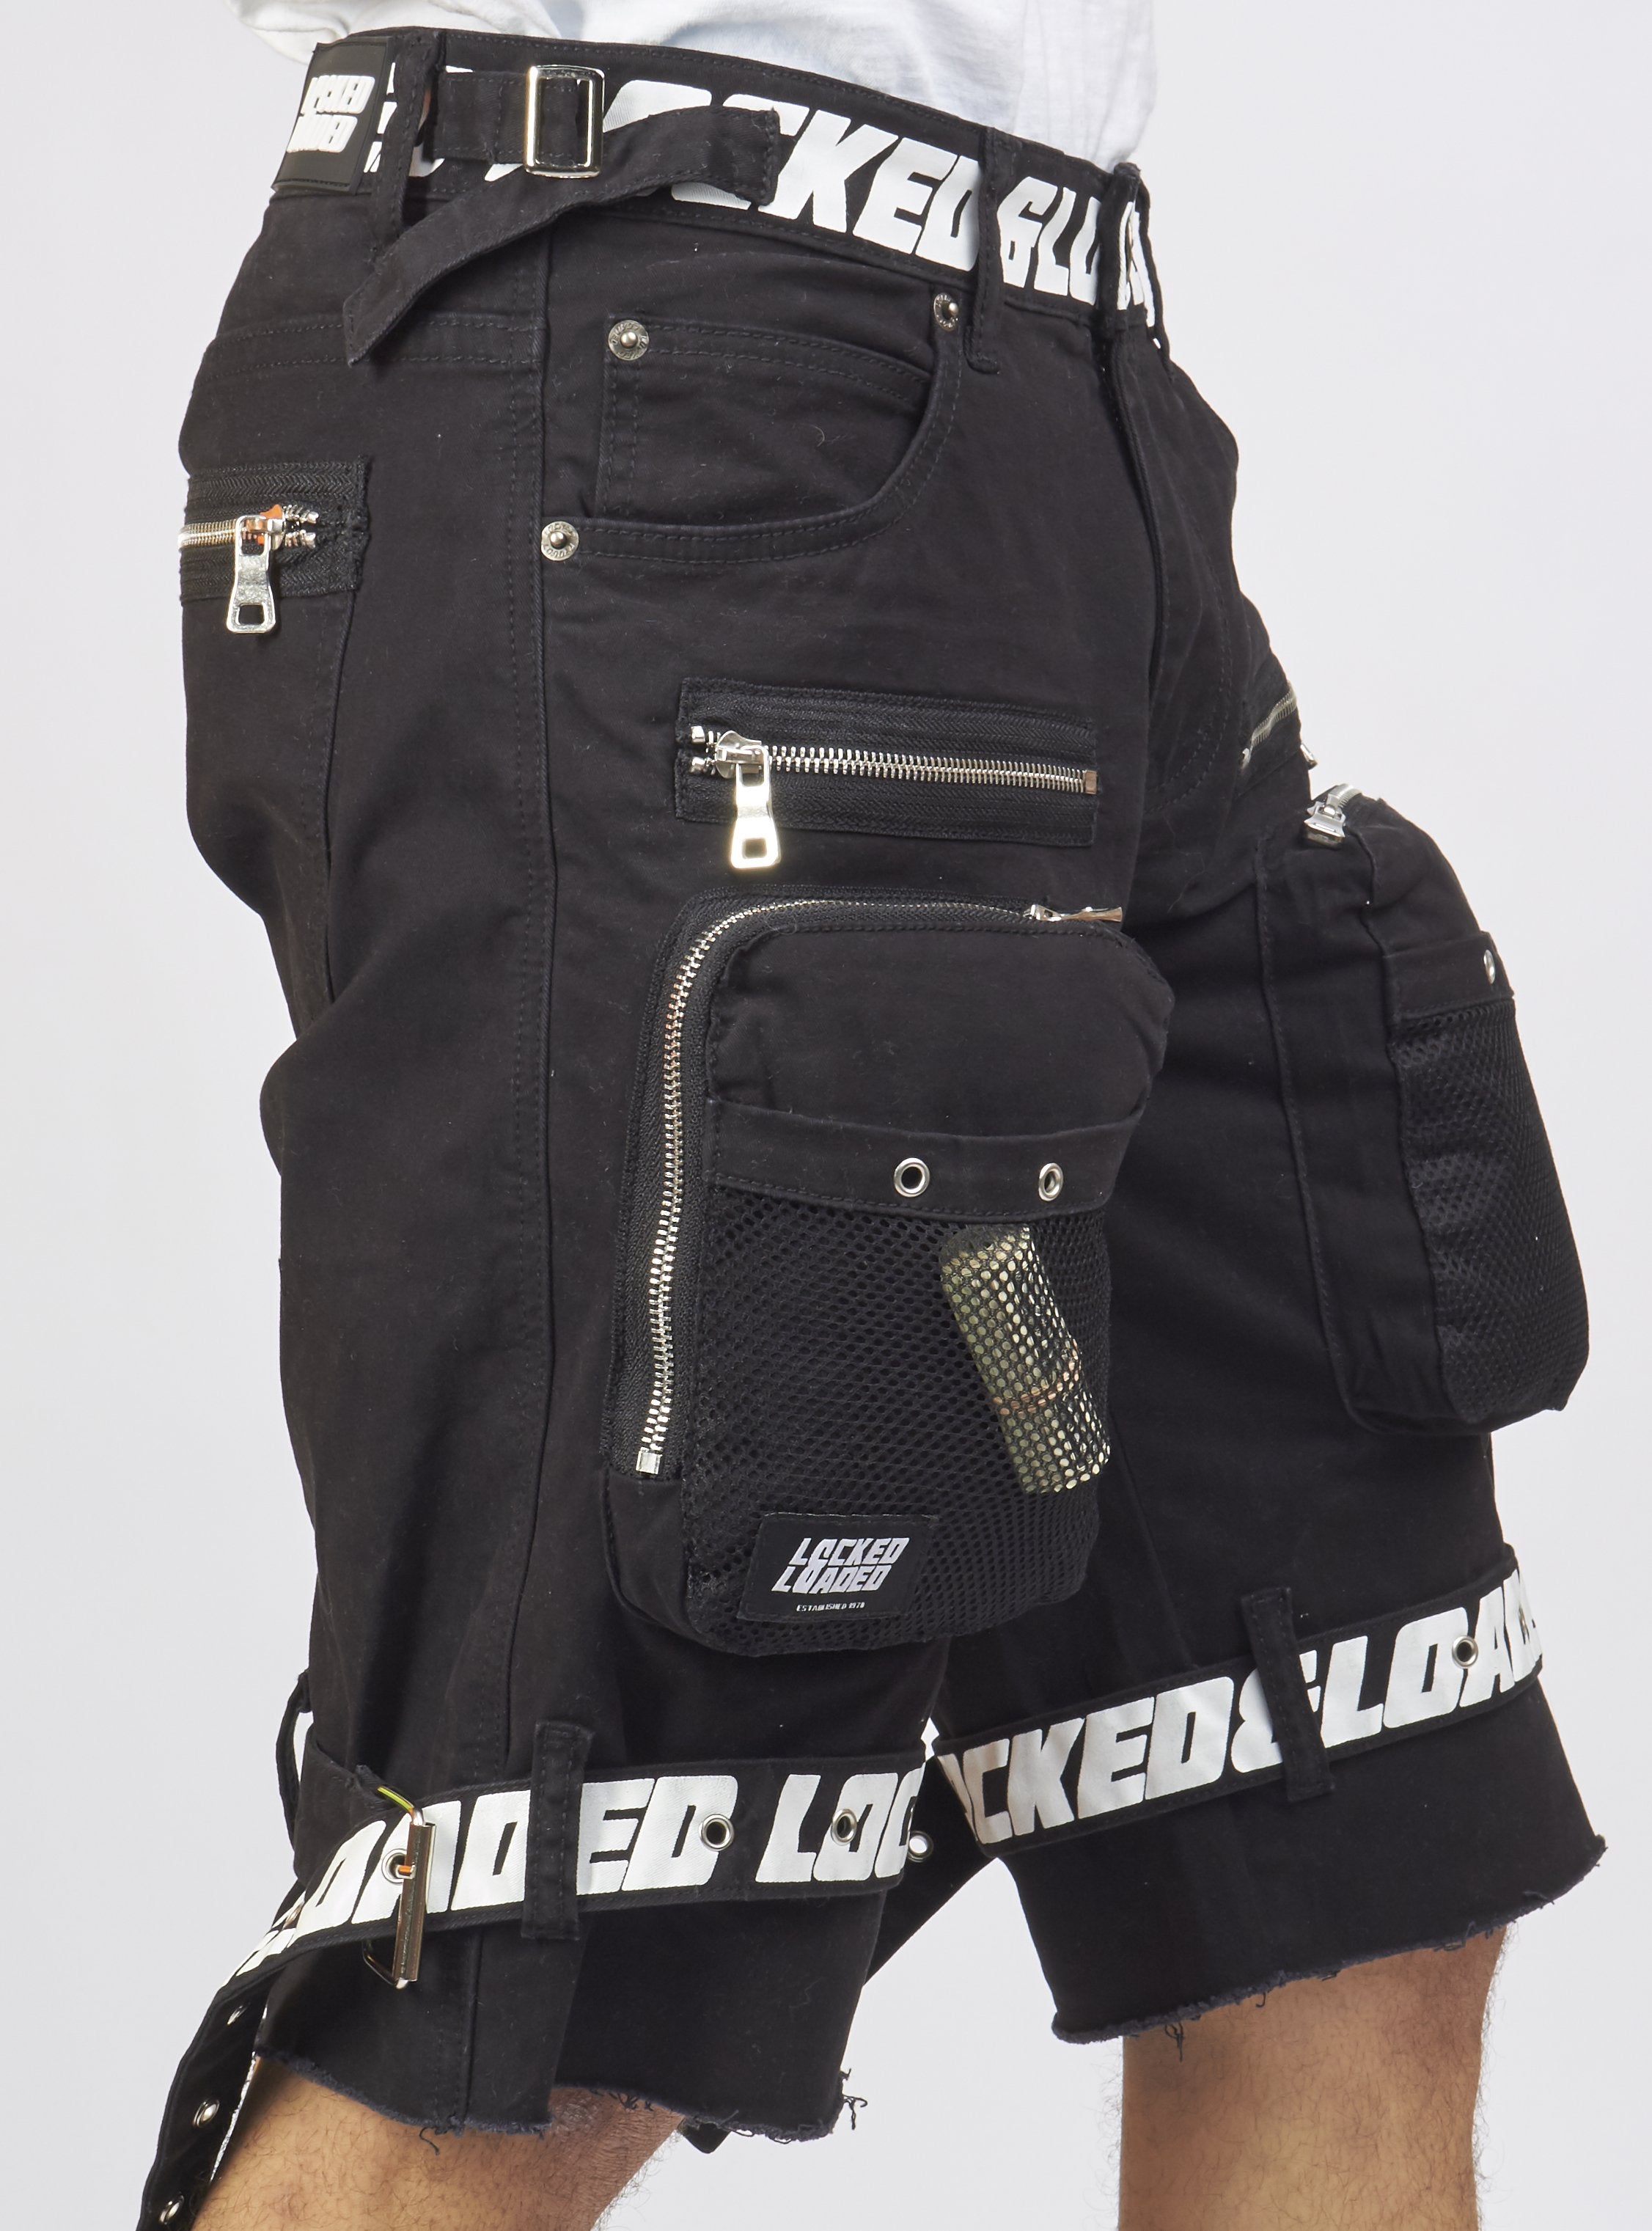 Locked & Loaded Shorts - Black Cotton Twill - Featuring 3D Cargo Pockets - Black / White Print - LDS421102